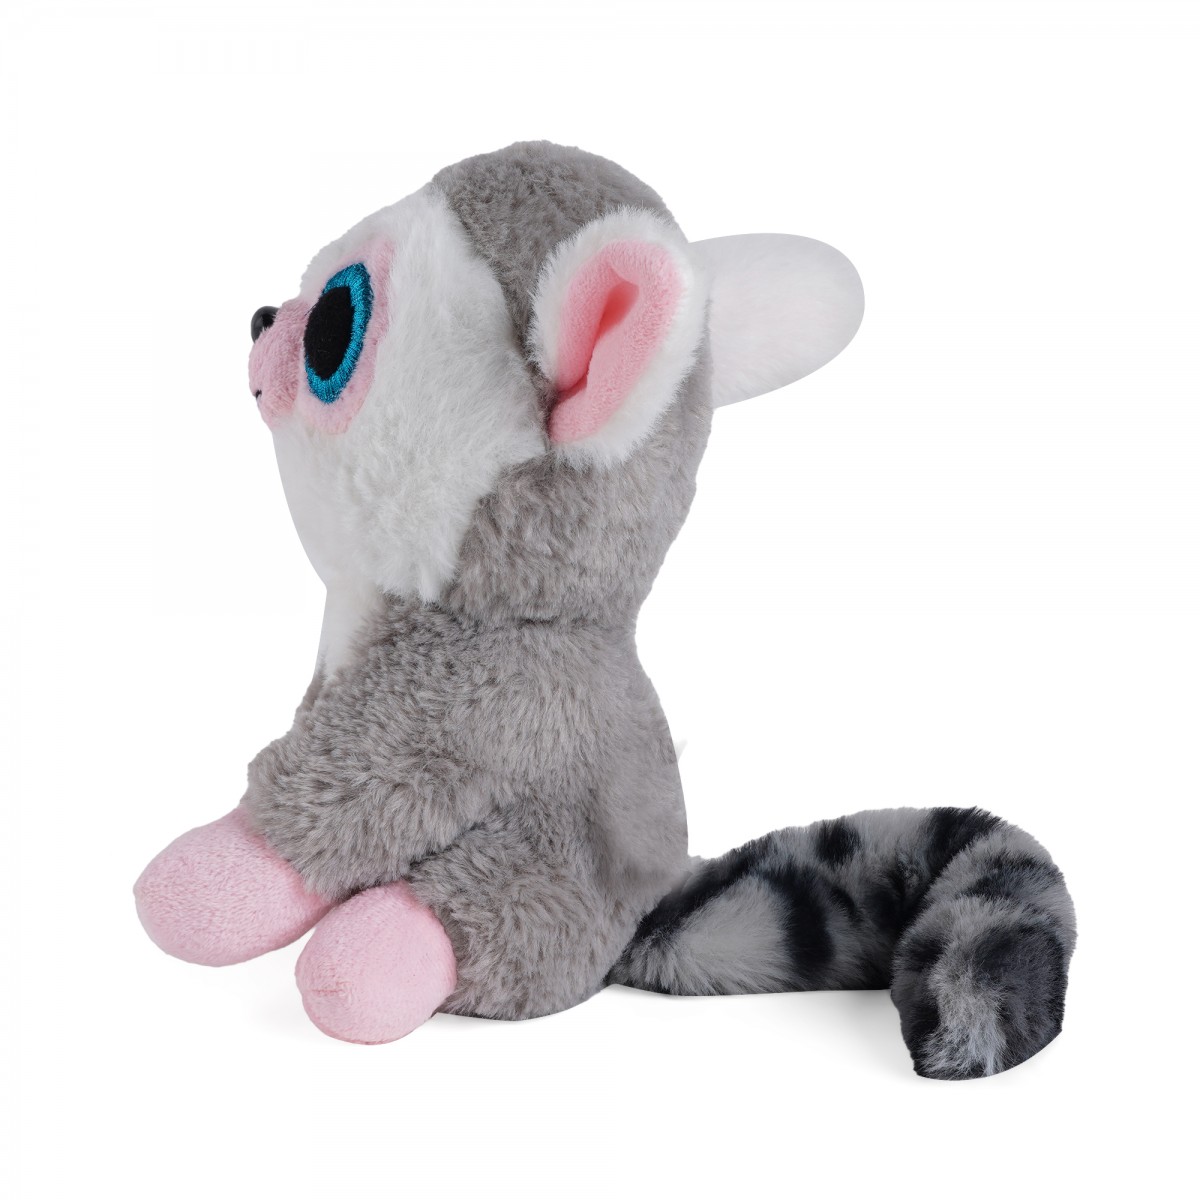 Huggable Cuddly Stuffed Toy By Fuzzbuzz, Soft Toys for Kids, Cute Plushies Grey, For Kids Of Age 2 Years & Above